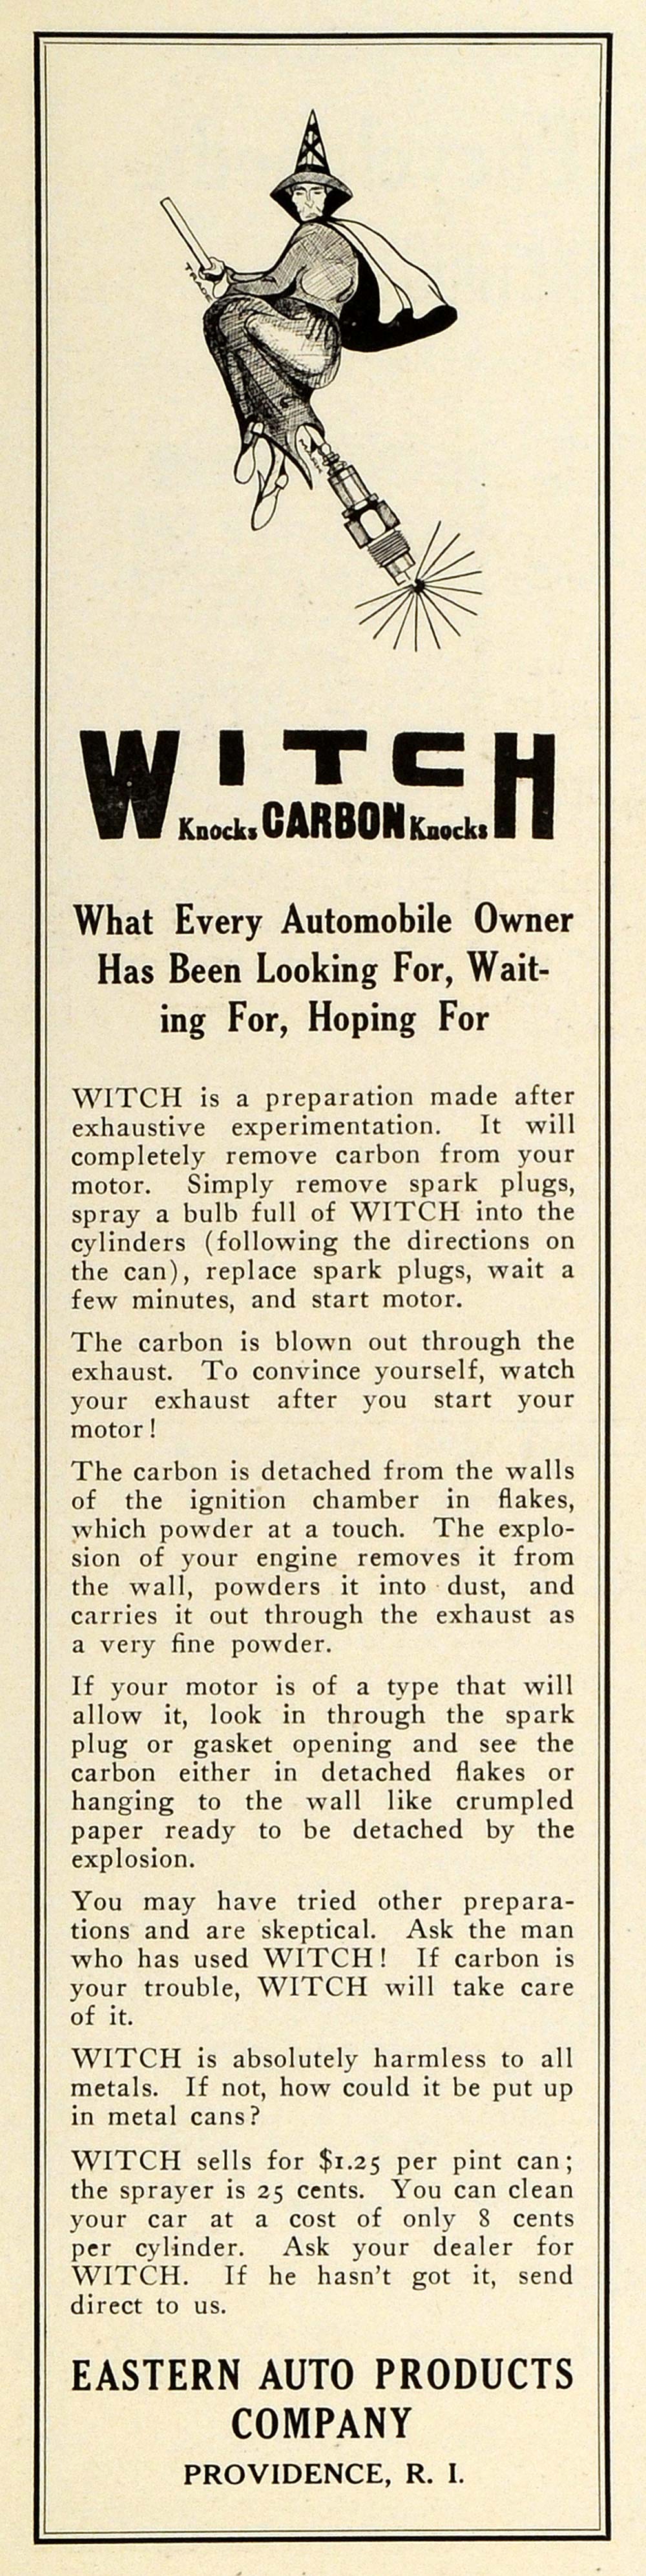 1922 Ad Eastern Auto Products Witch Can Sprayer Motor Carbon Remover AMM1